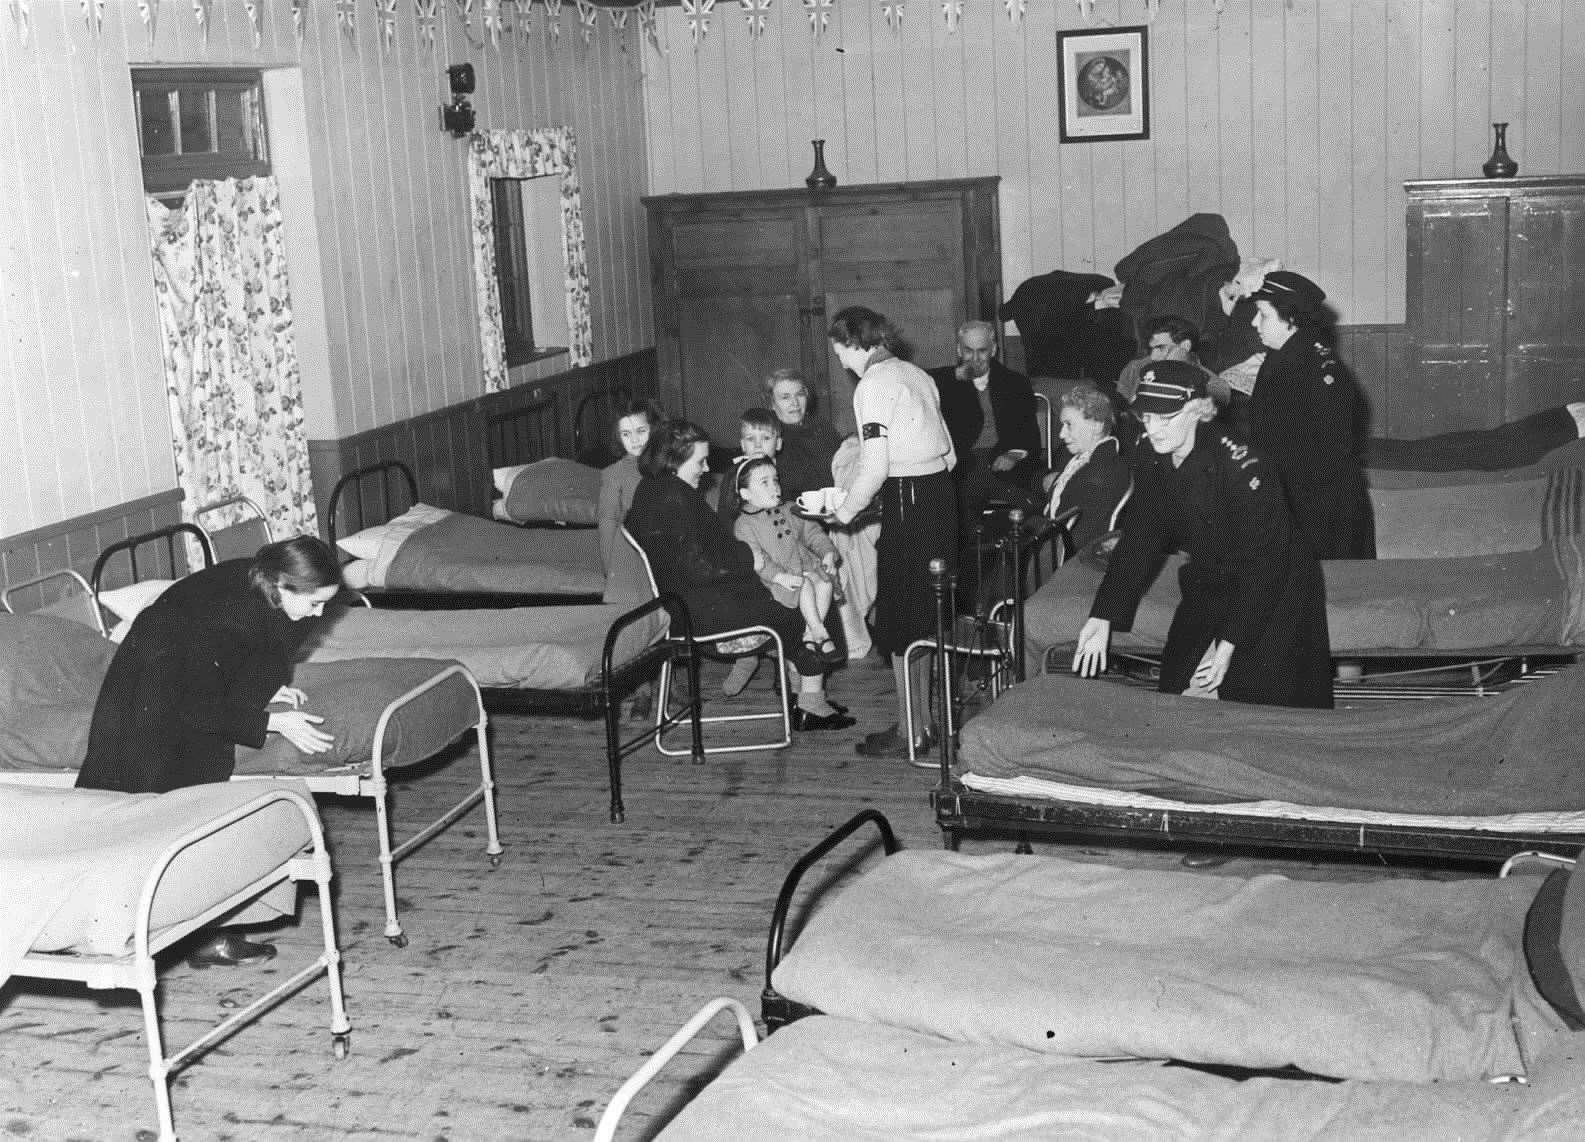 The Red Cross set up emergency accommodation for those forced out of their homes